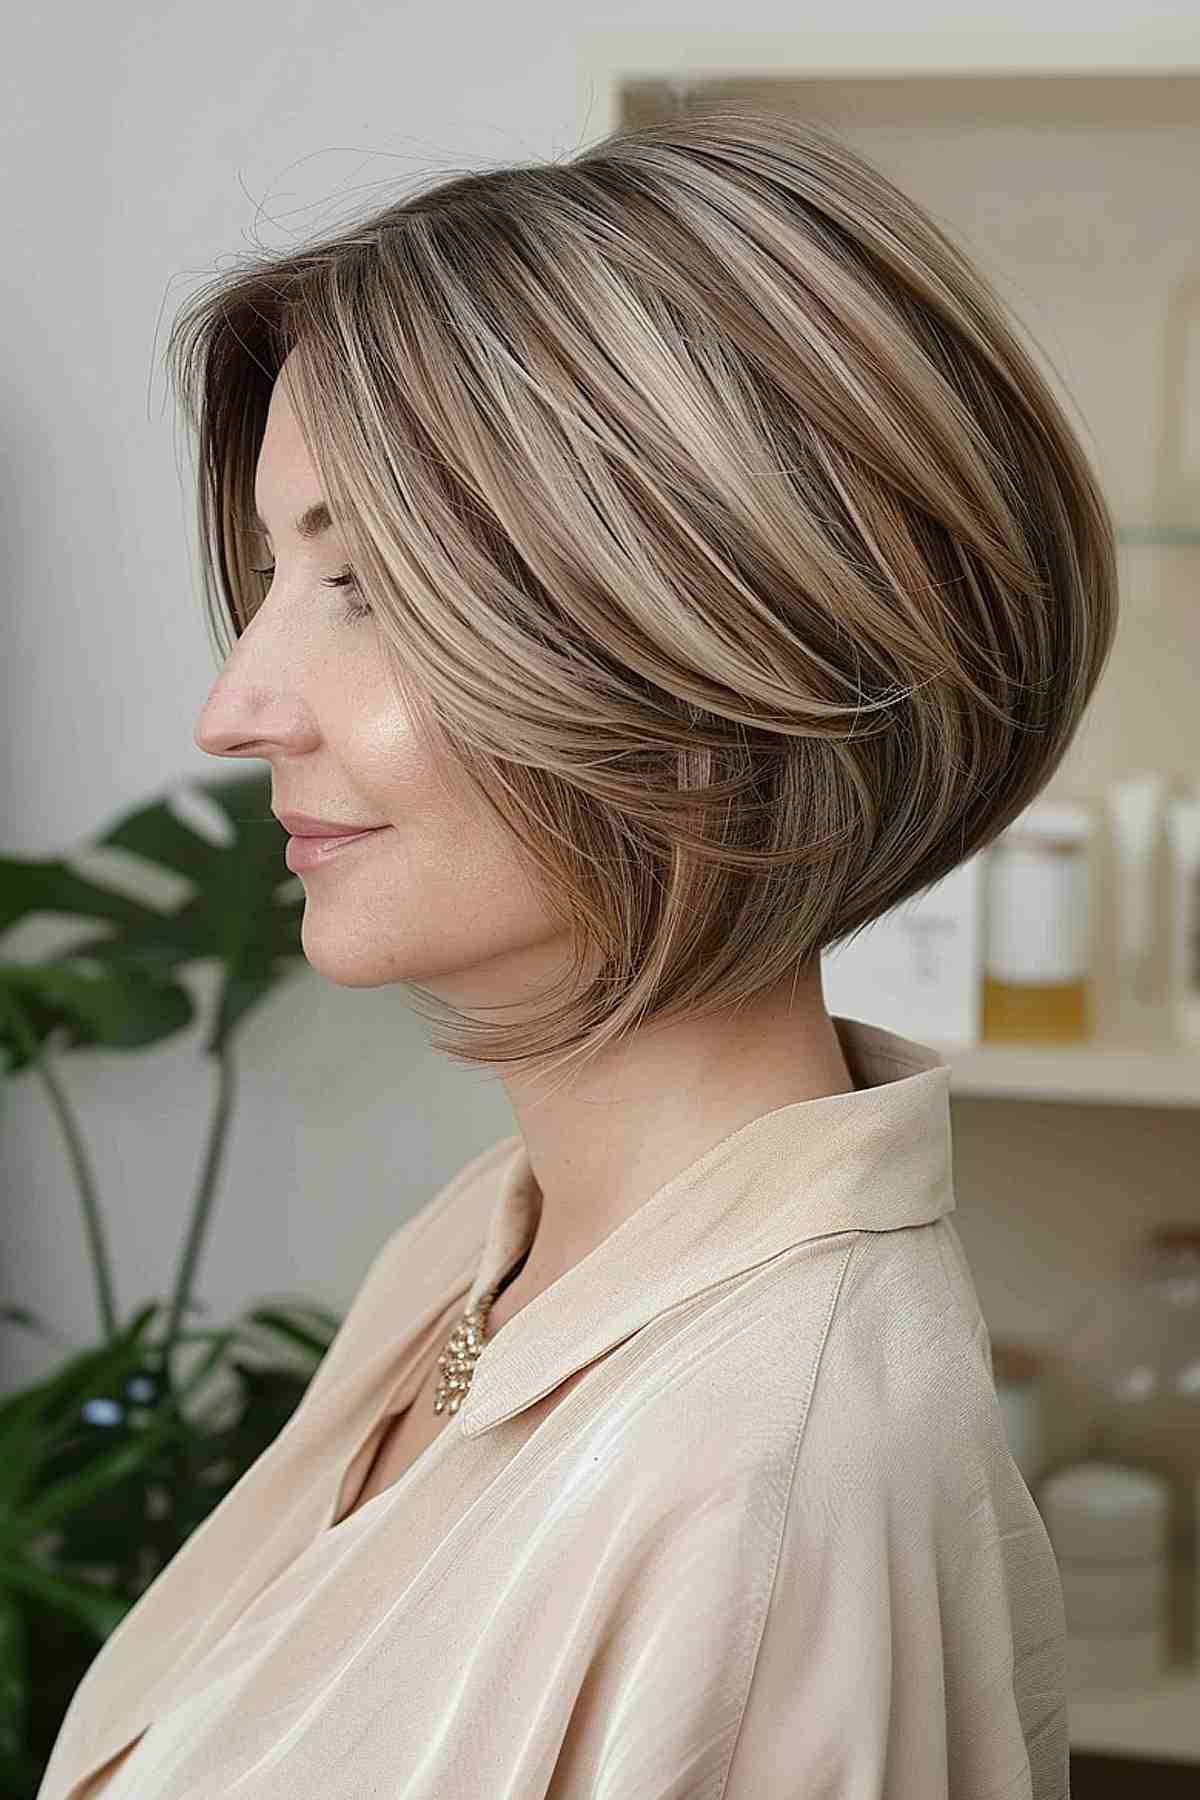 Stacked feathered bob haircut with voluminous layers and soft, airy texture